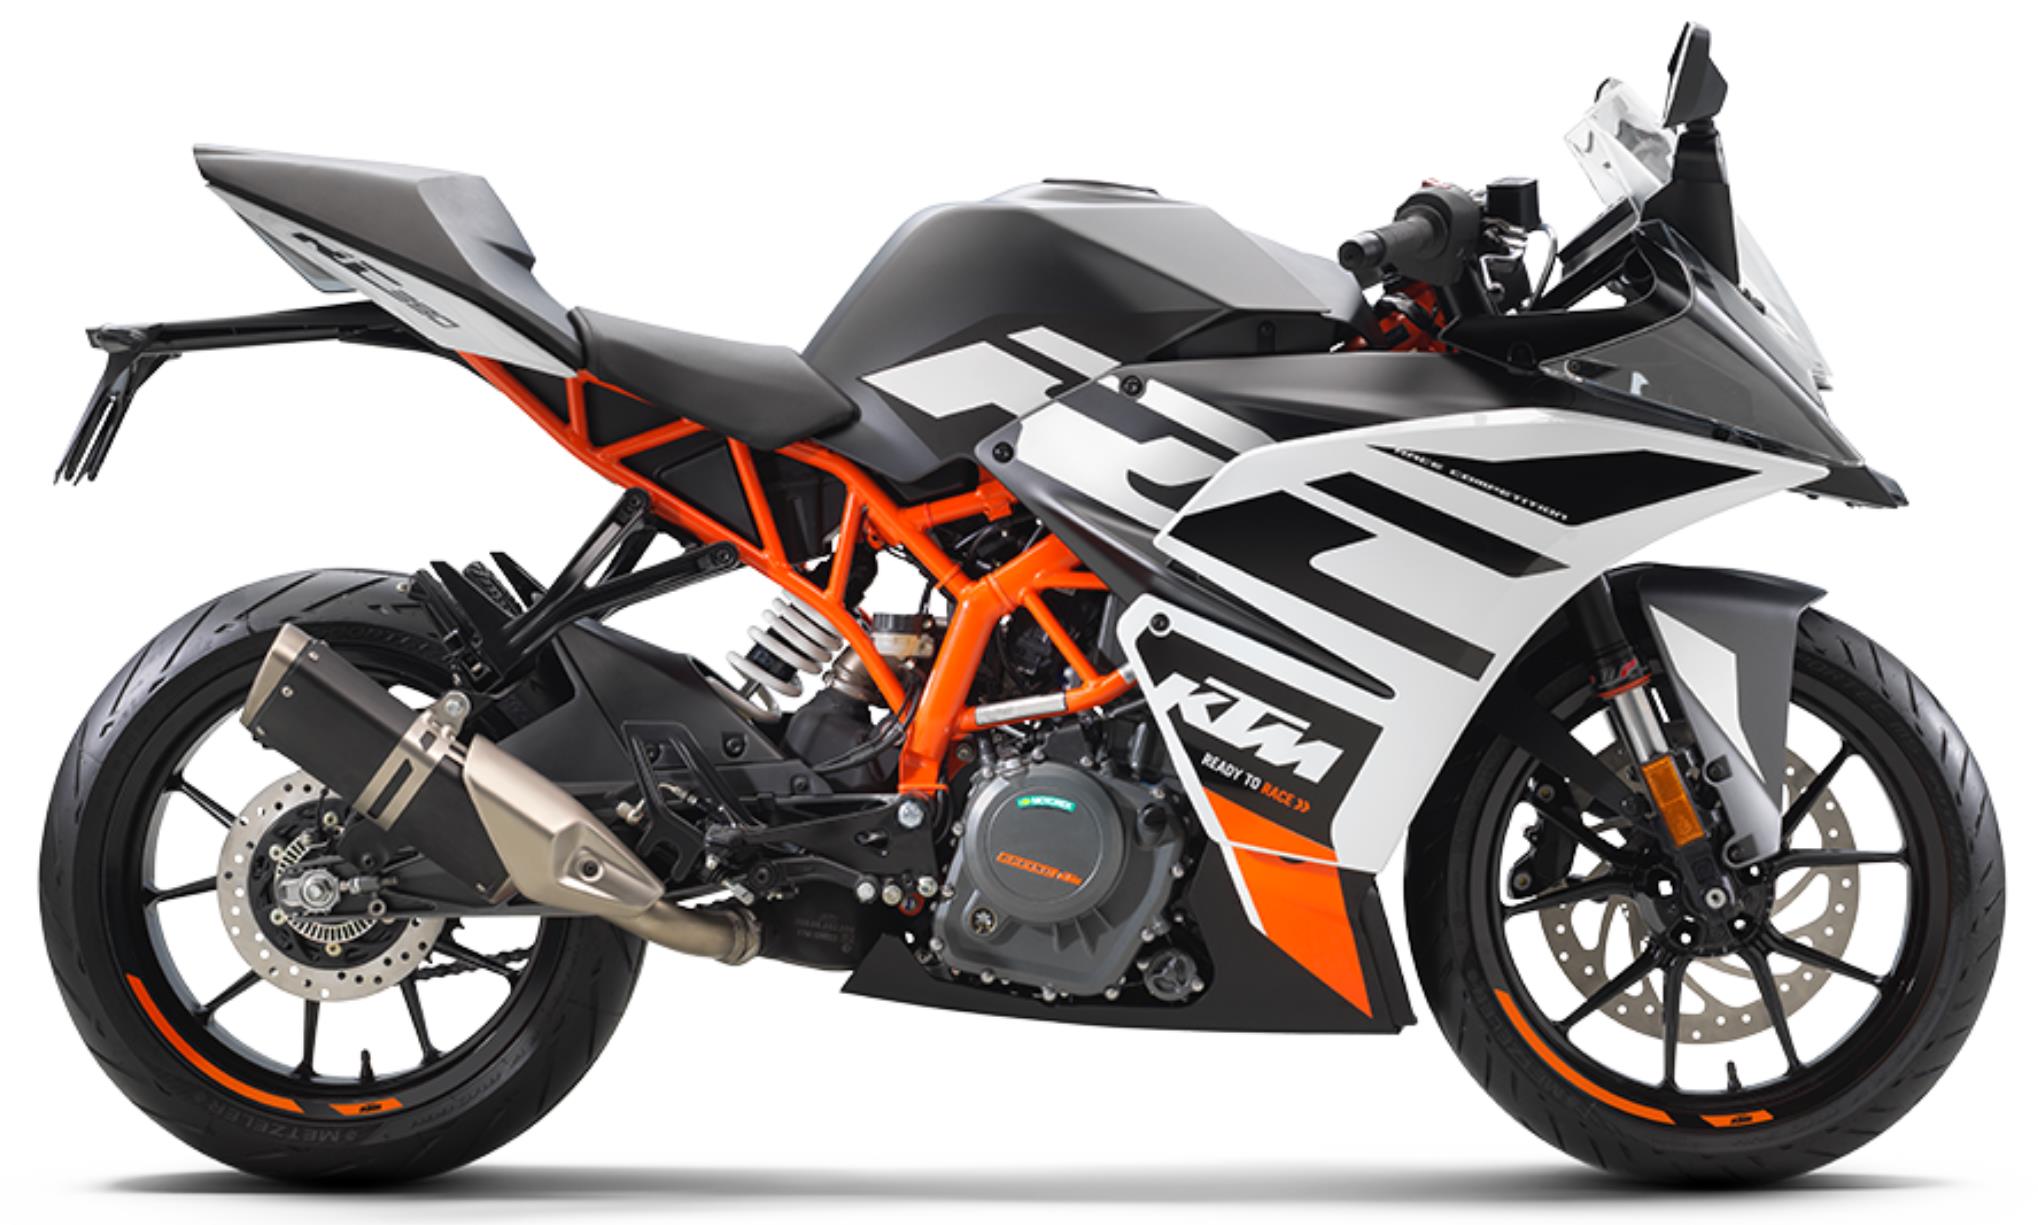 New KTM RC 390 BS6 Price in India [Full Specifications]